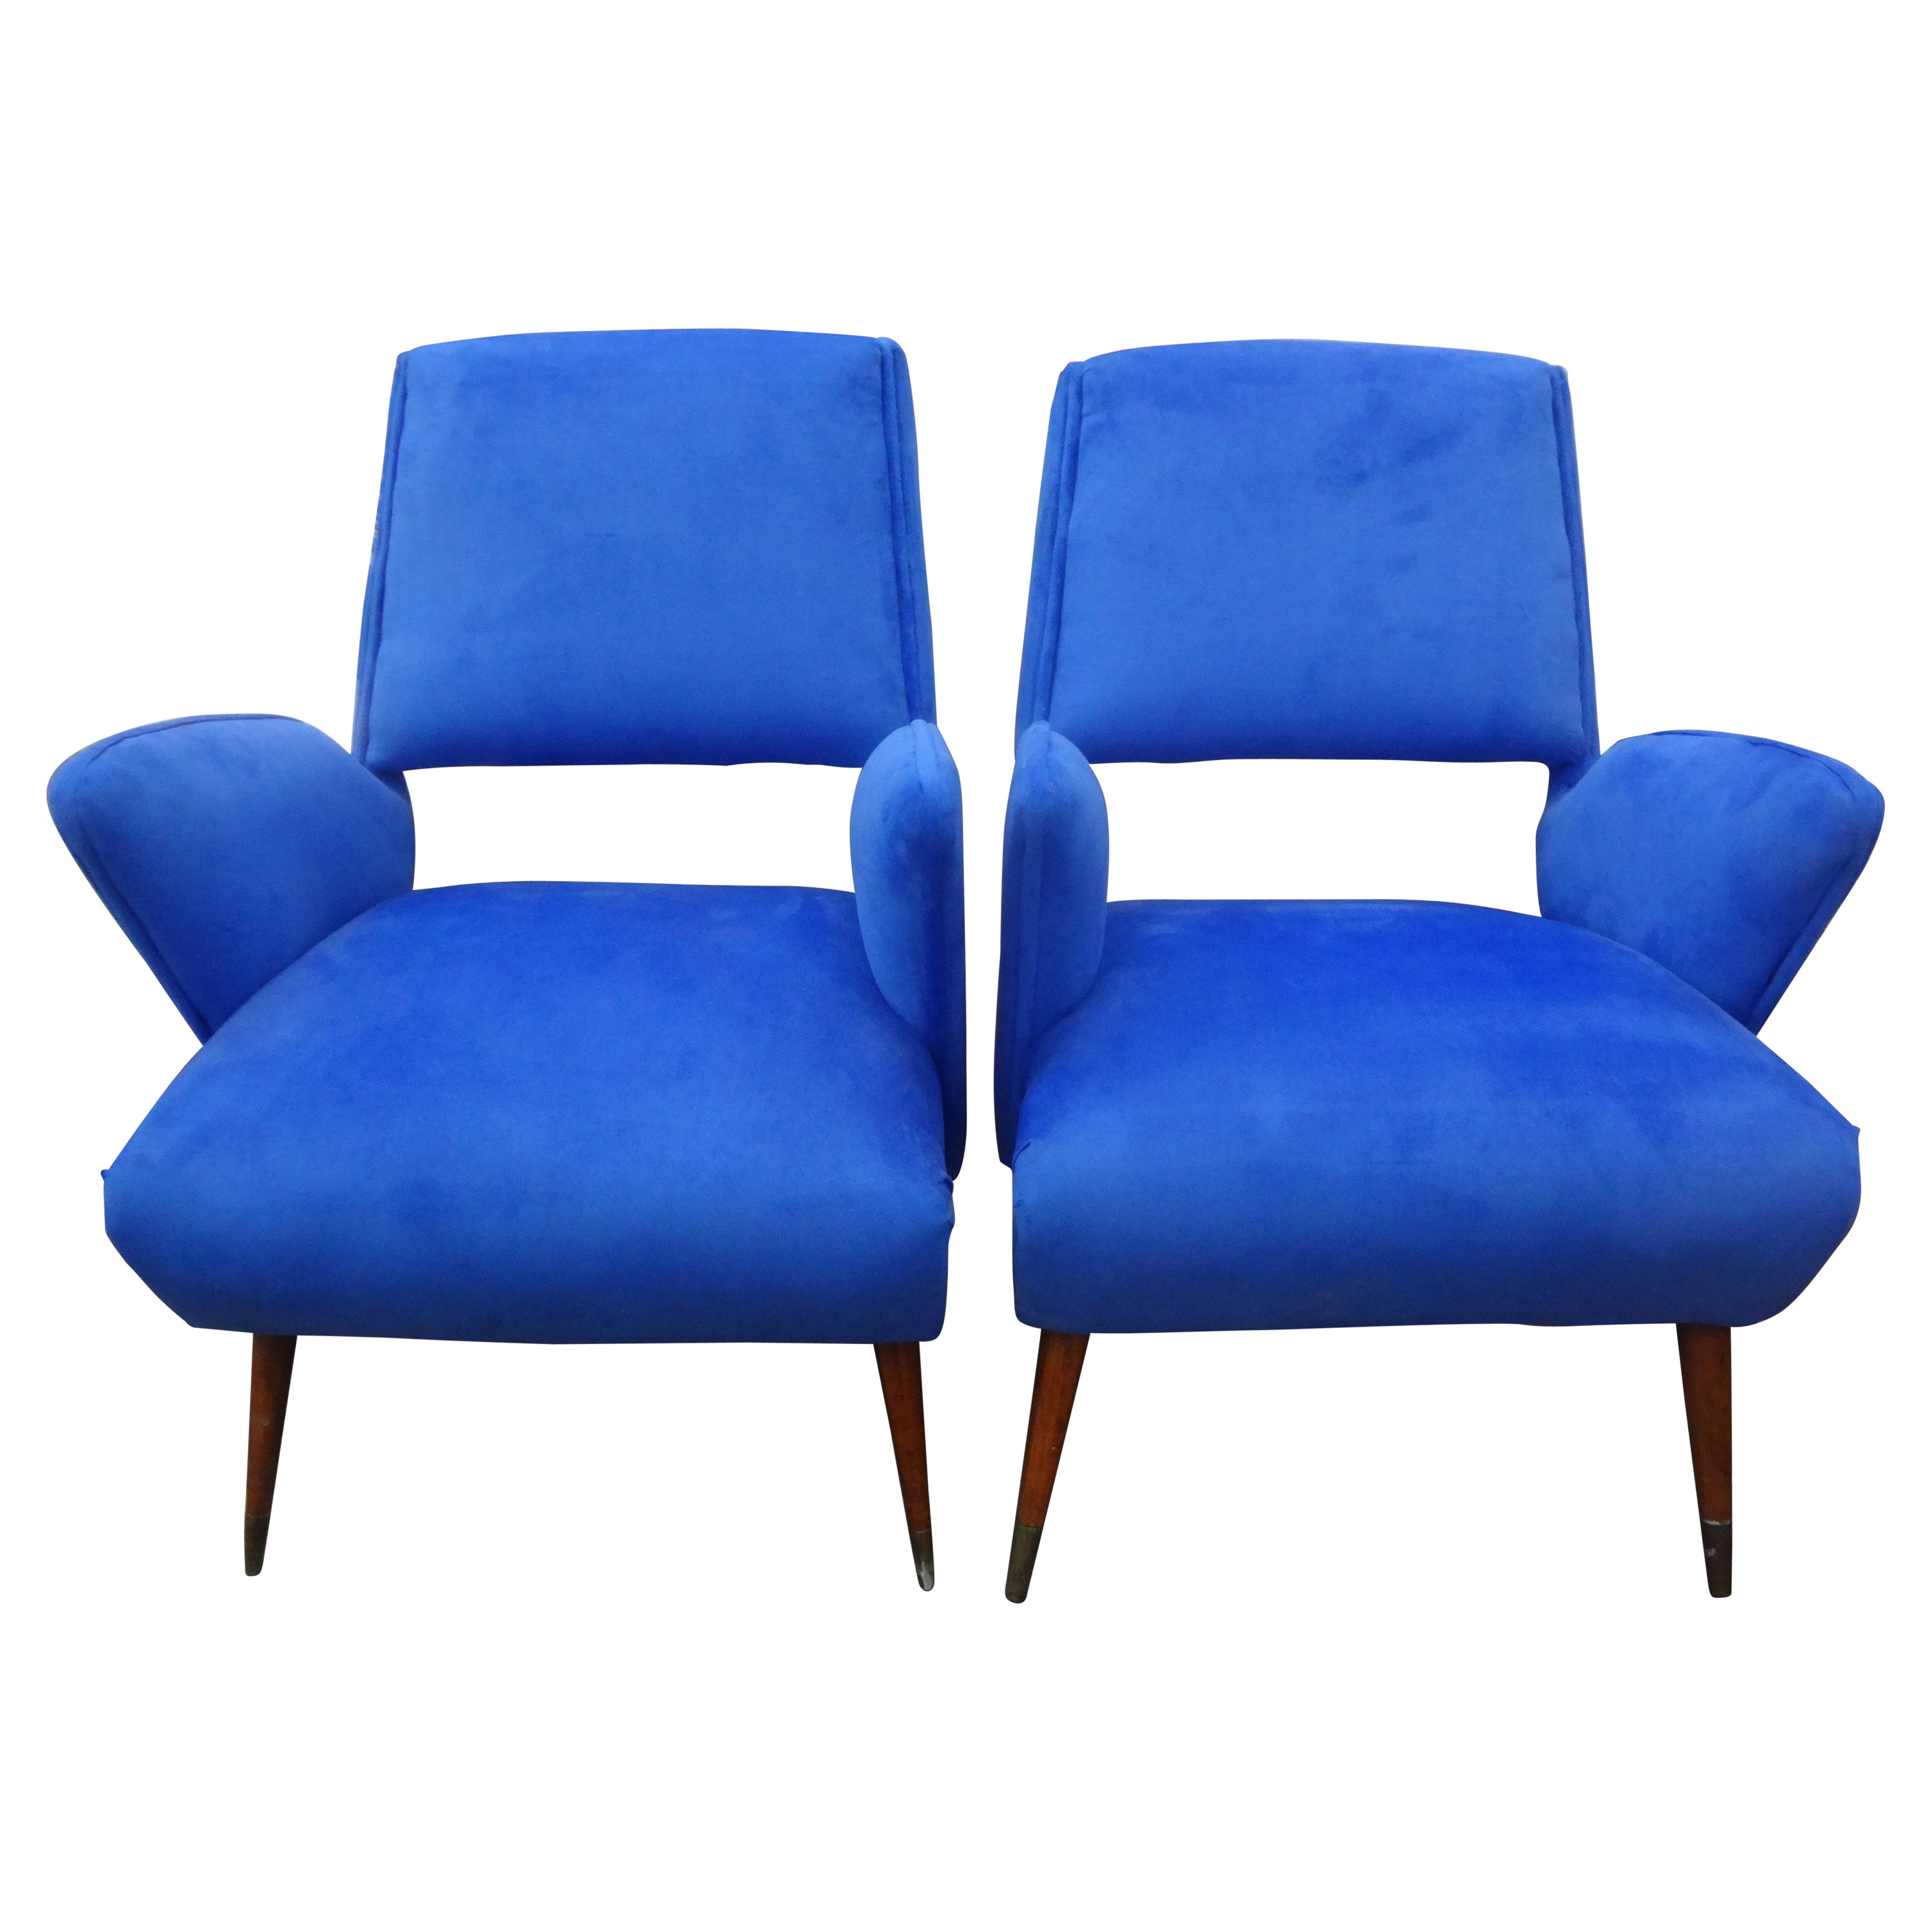 Pair of Italian Gio Ponti inspired lounge chairs.
This stunning pair of Italian Mid-Century Modern lounge chairs, club chairs, or side chairs have beautifully tapered legs with brass sabots and an interesting open back. These Italian modern chairs